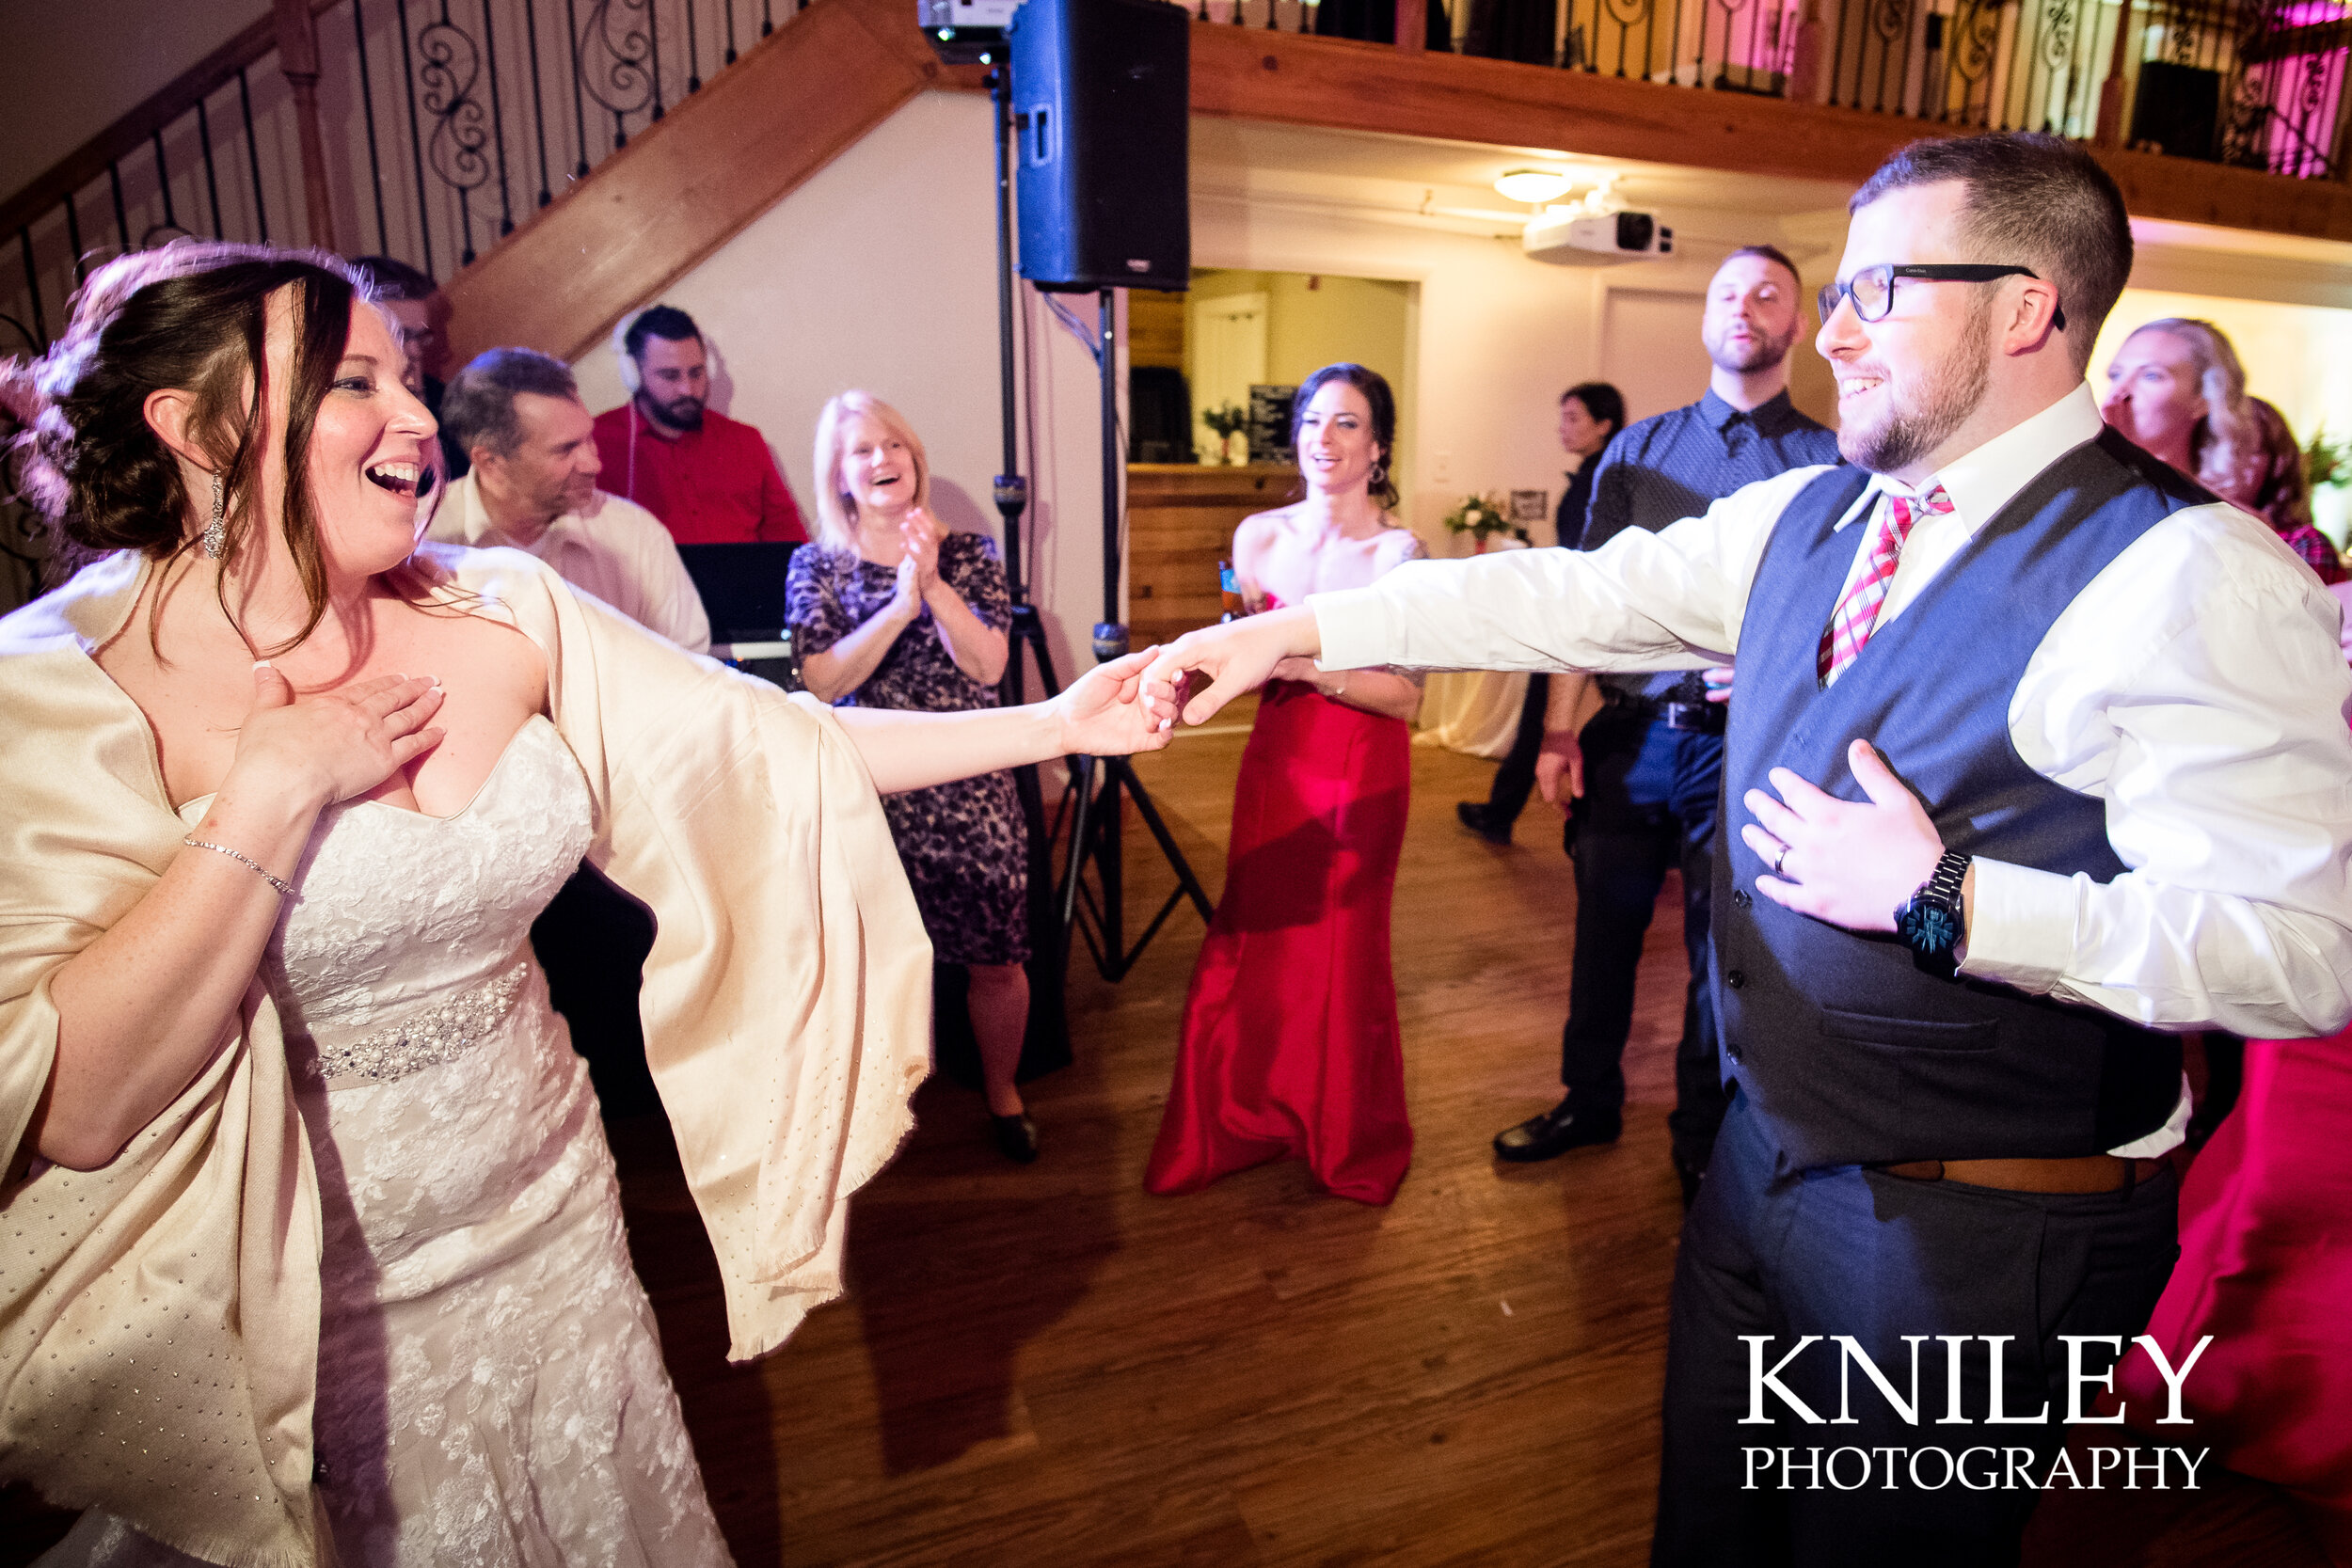 027-Kniley-Photography-Westminster-Chapel-Wedding-Venue-Picture-0511.jpg